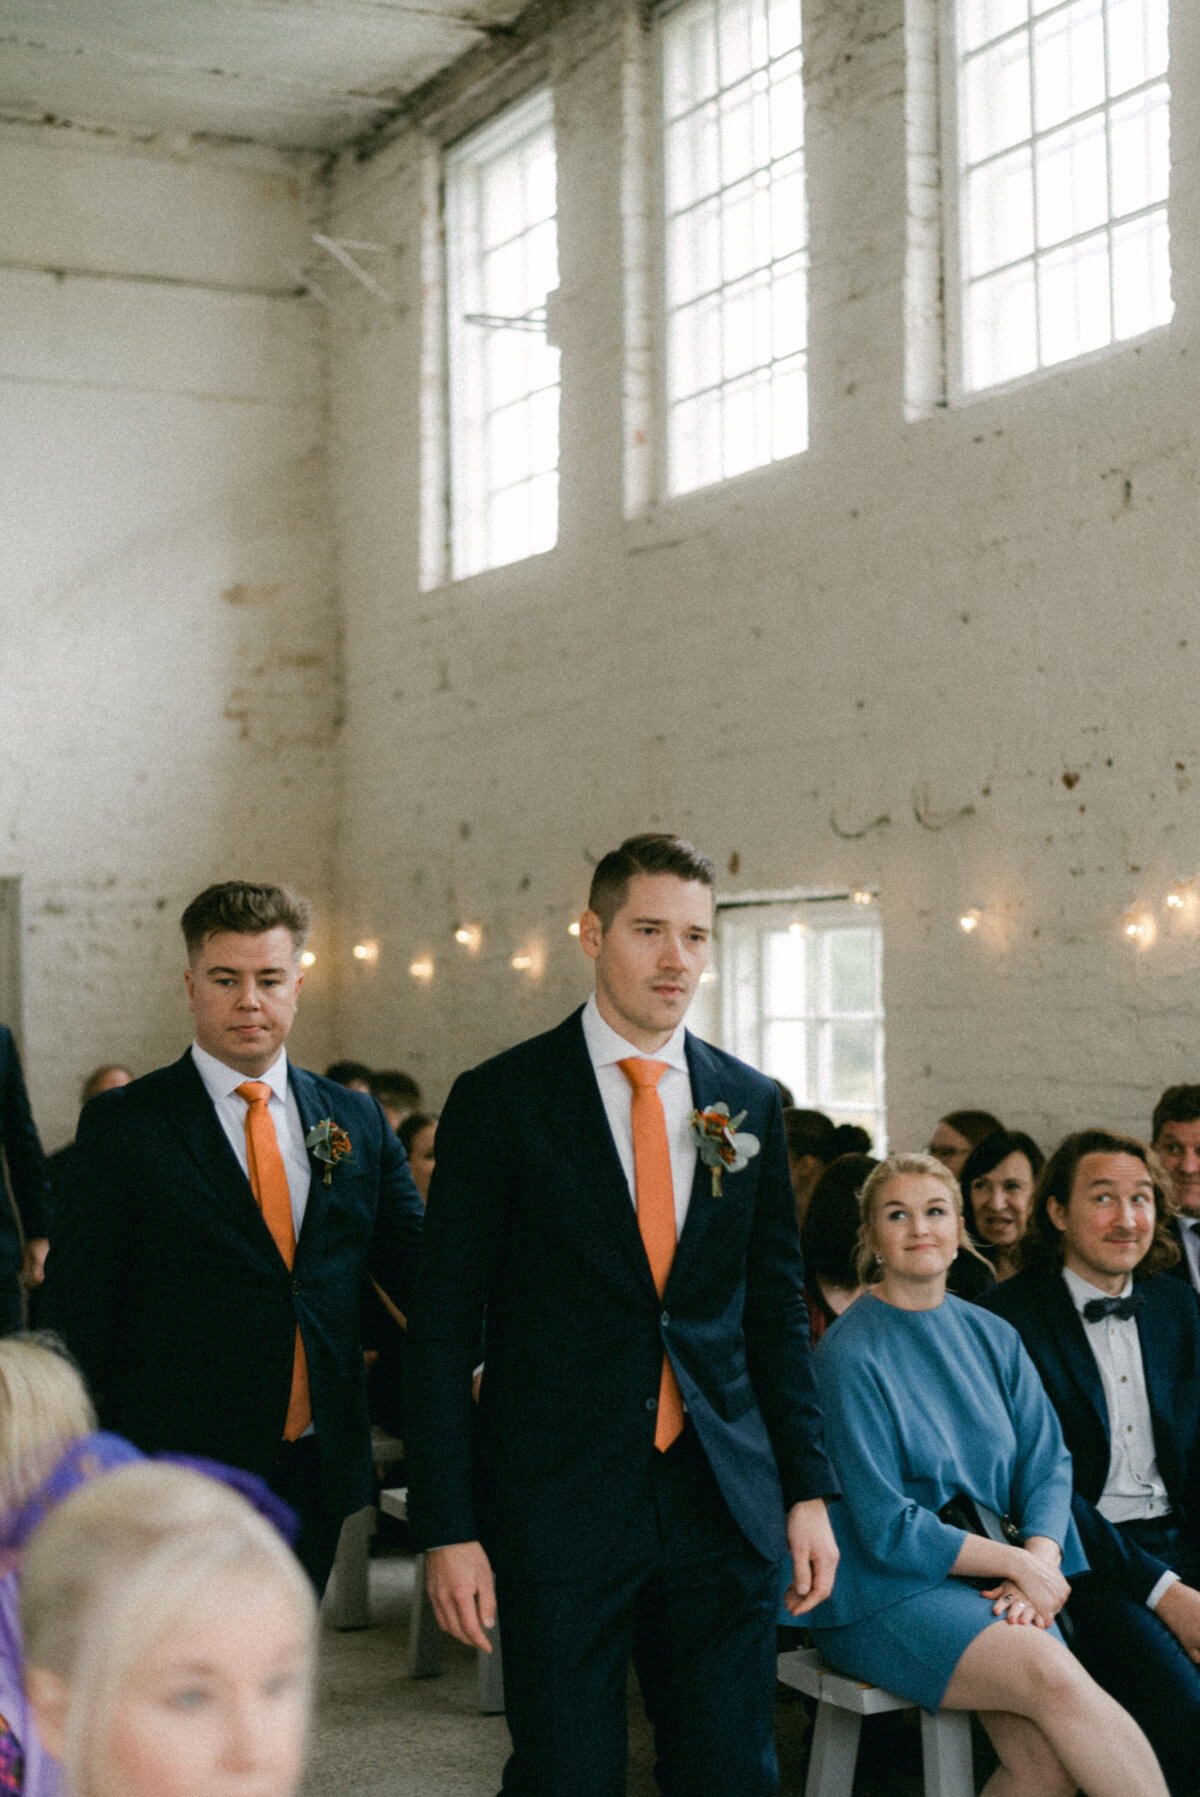 A documentary wedding  photo of groomsmen arriving to the ceremony in the orangerie in Oitbacka gård captured by wedding photographer Hannika Gabrielsson in Finland